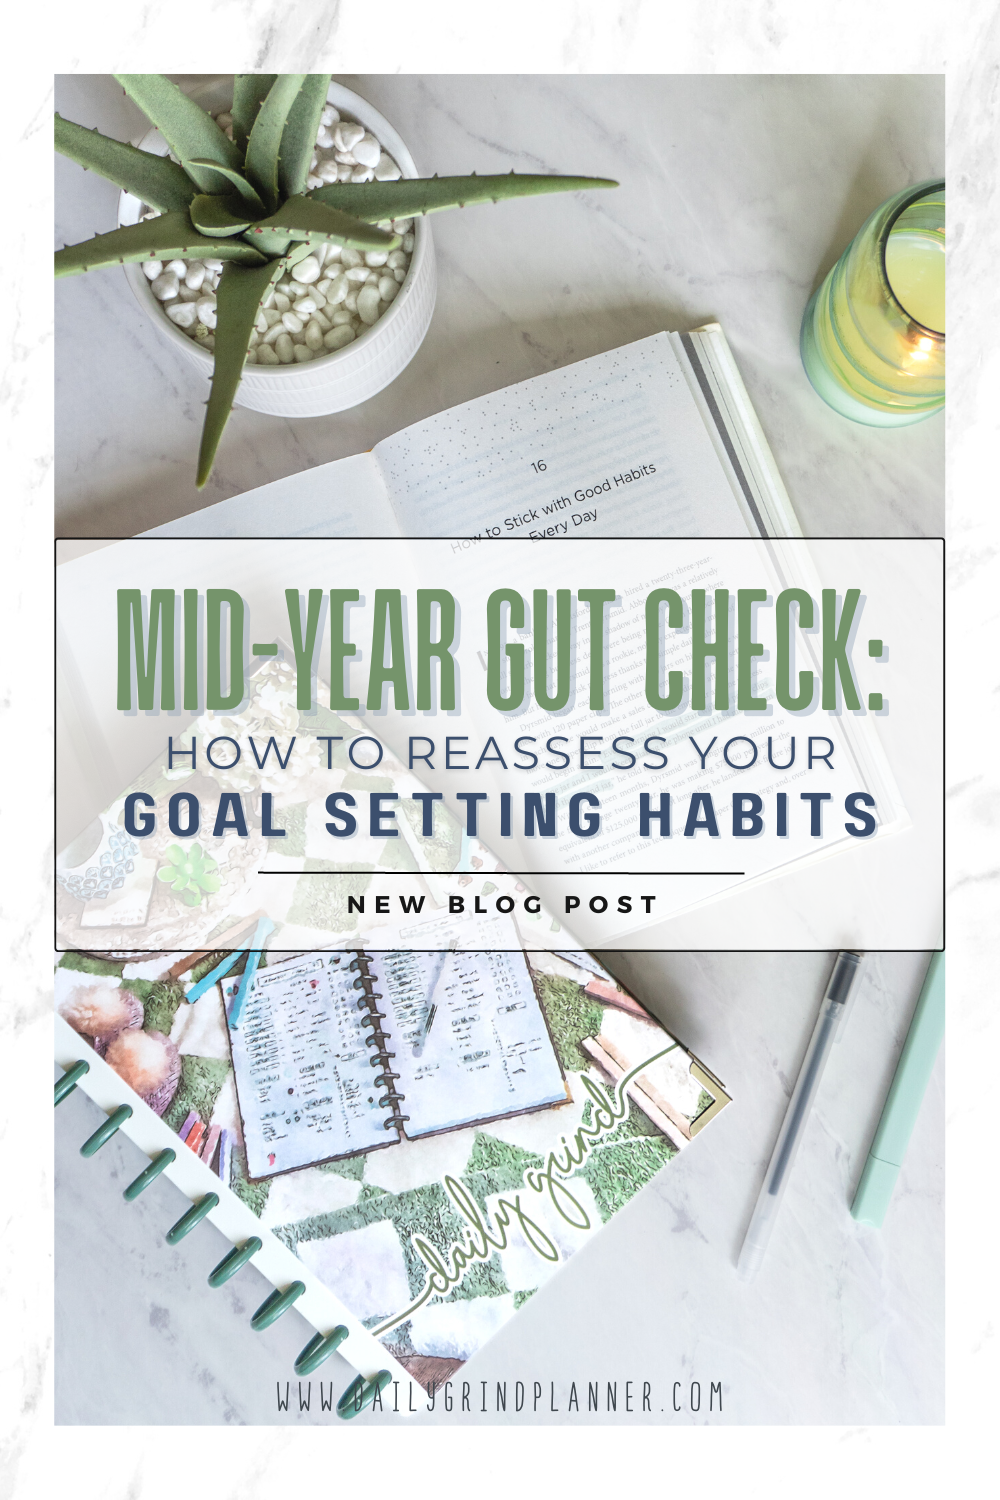 MID-YEAR GUT CHECK: HOW TO REASSESS YOUR GOAL SETTING HABITS